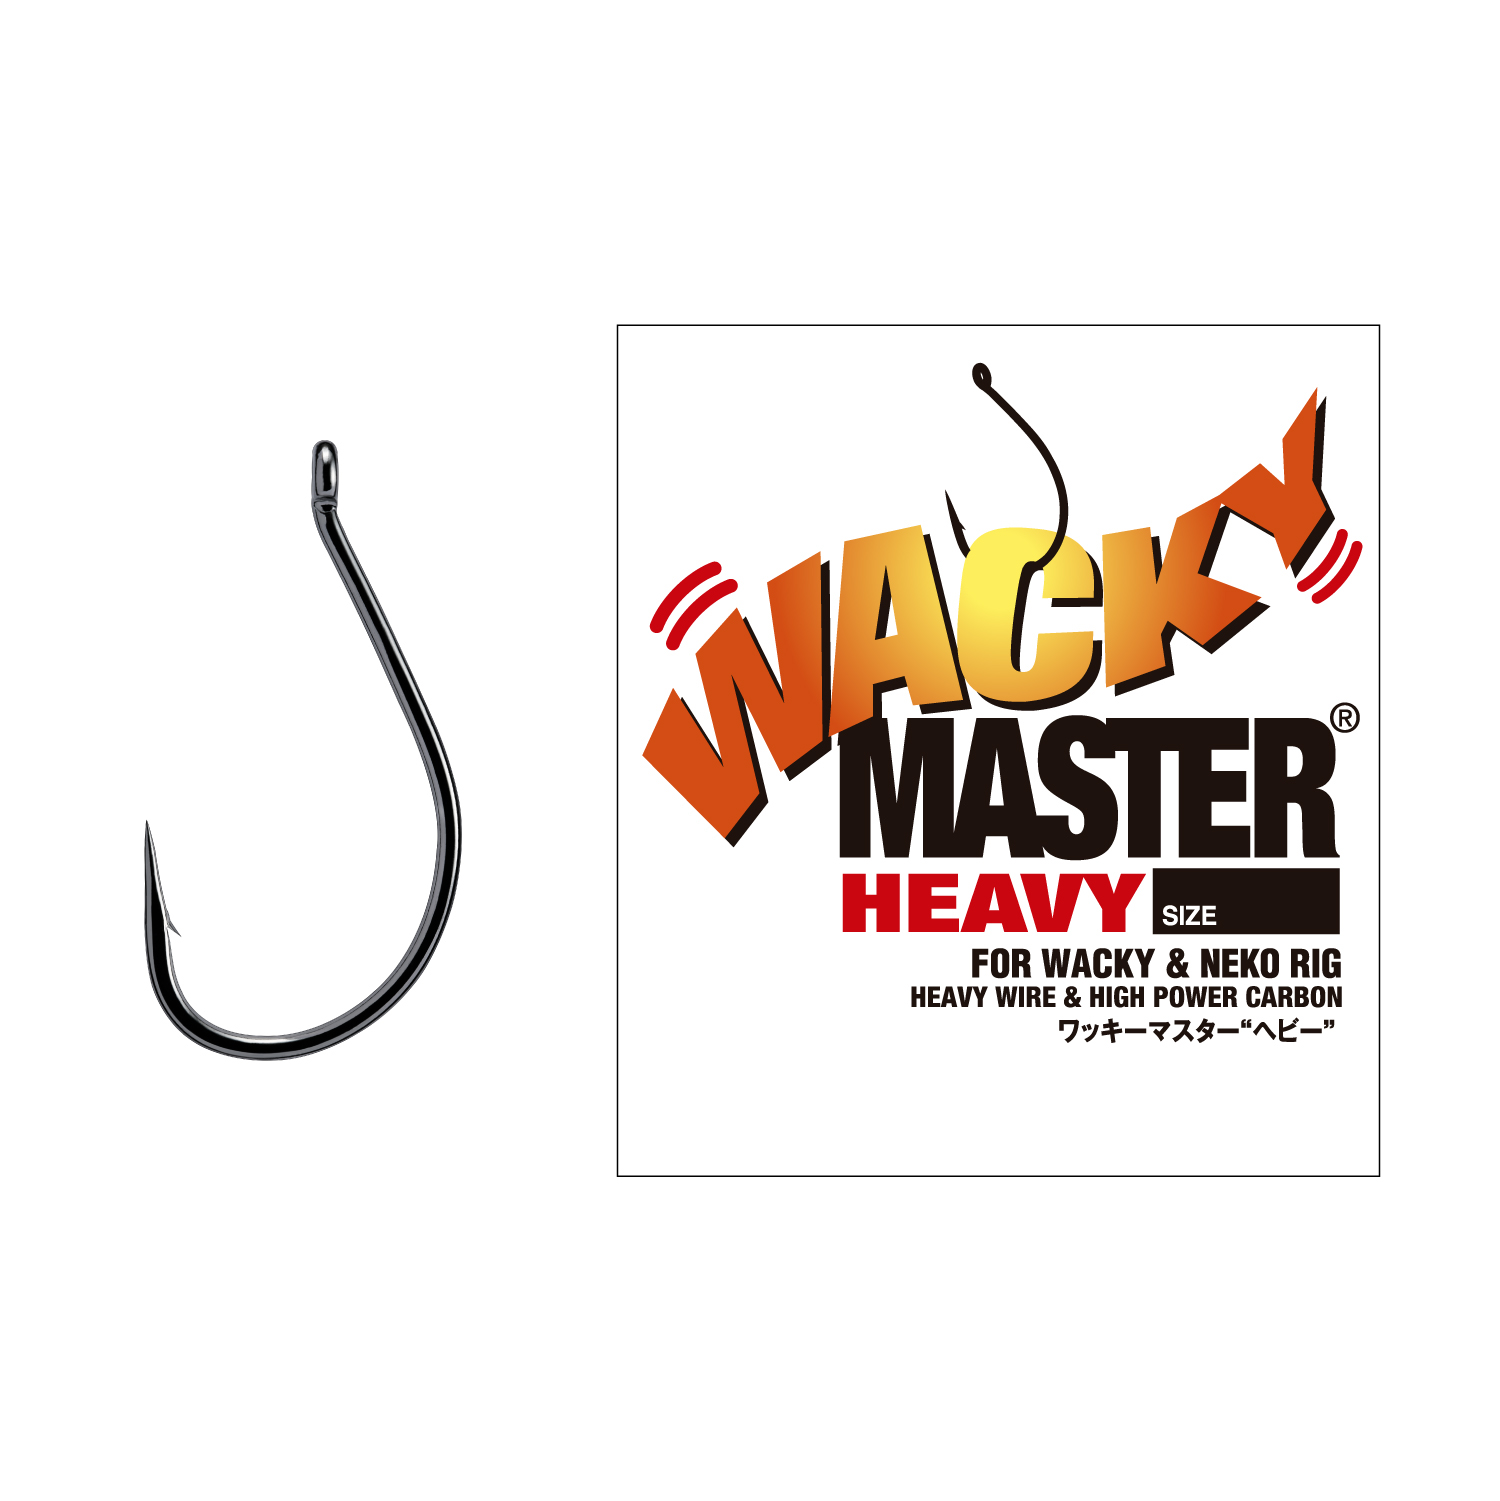 Wacky Master Heavy (Standard Wire ＆ High Power Carbon ／ For Wacky ＆ Undershot Rig )